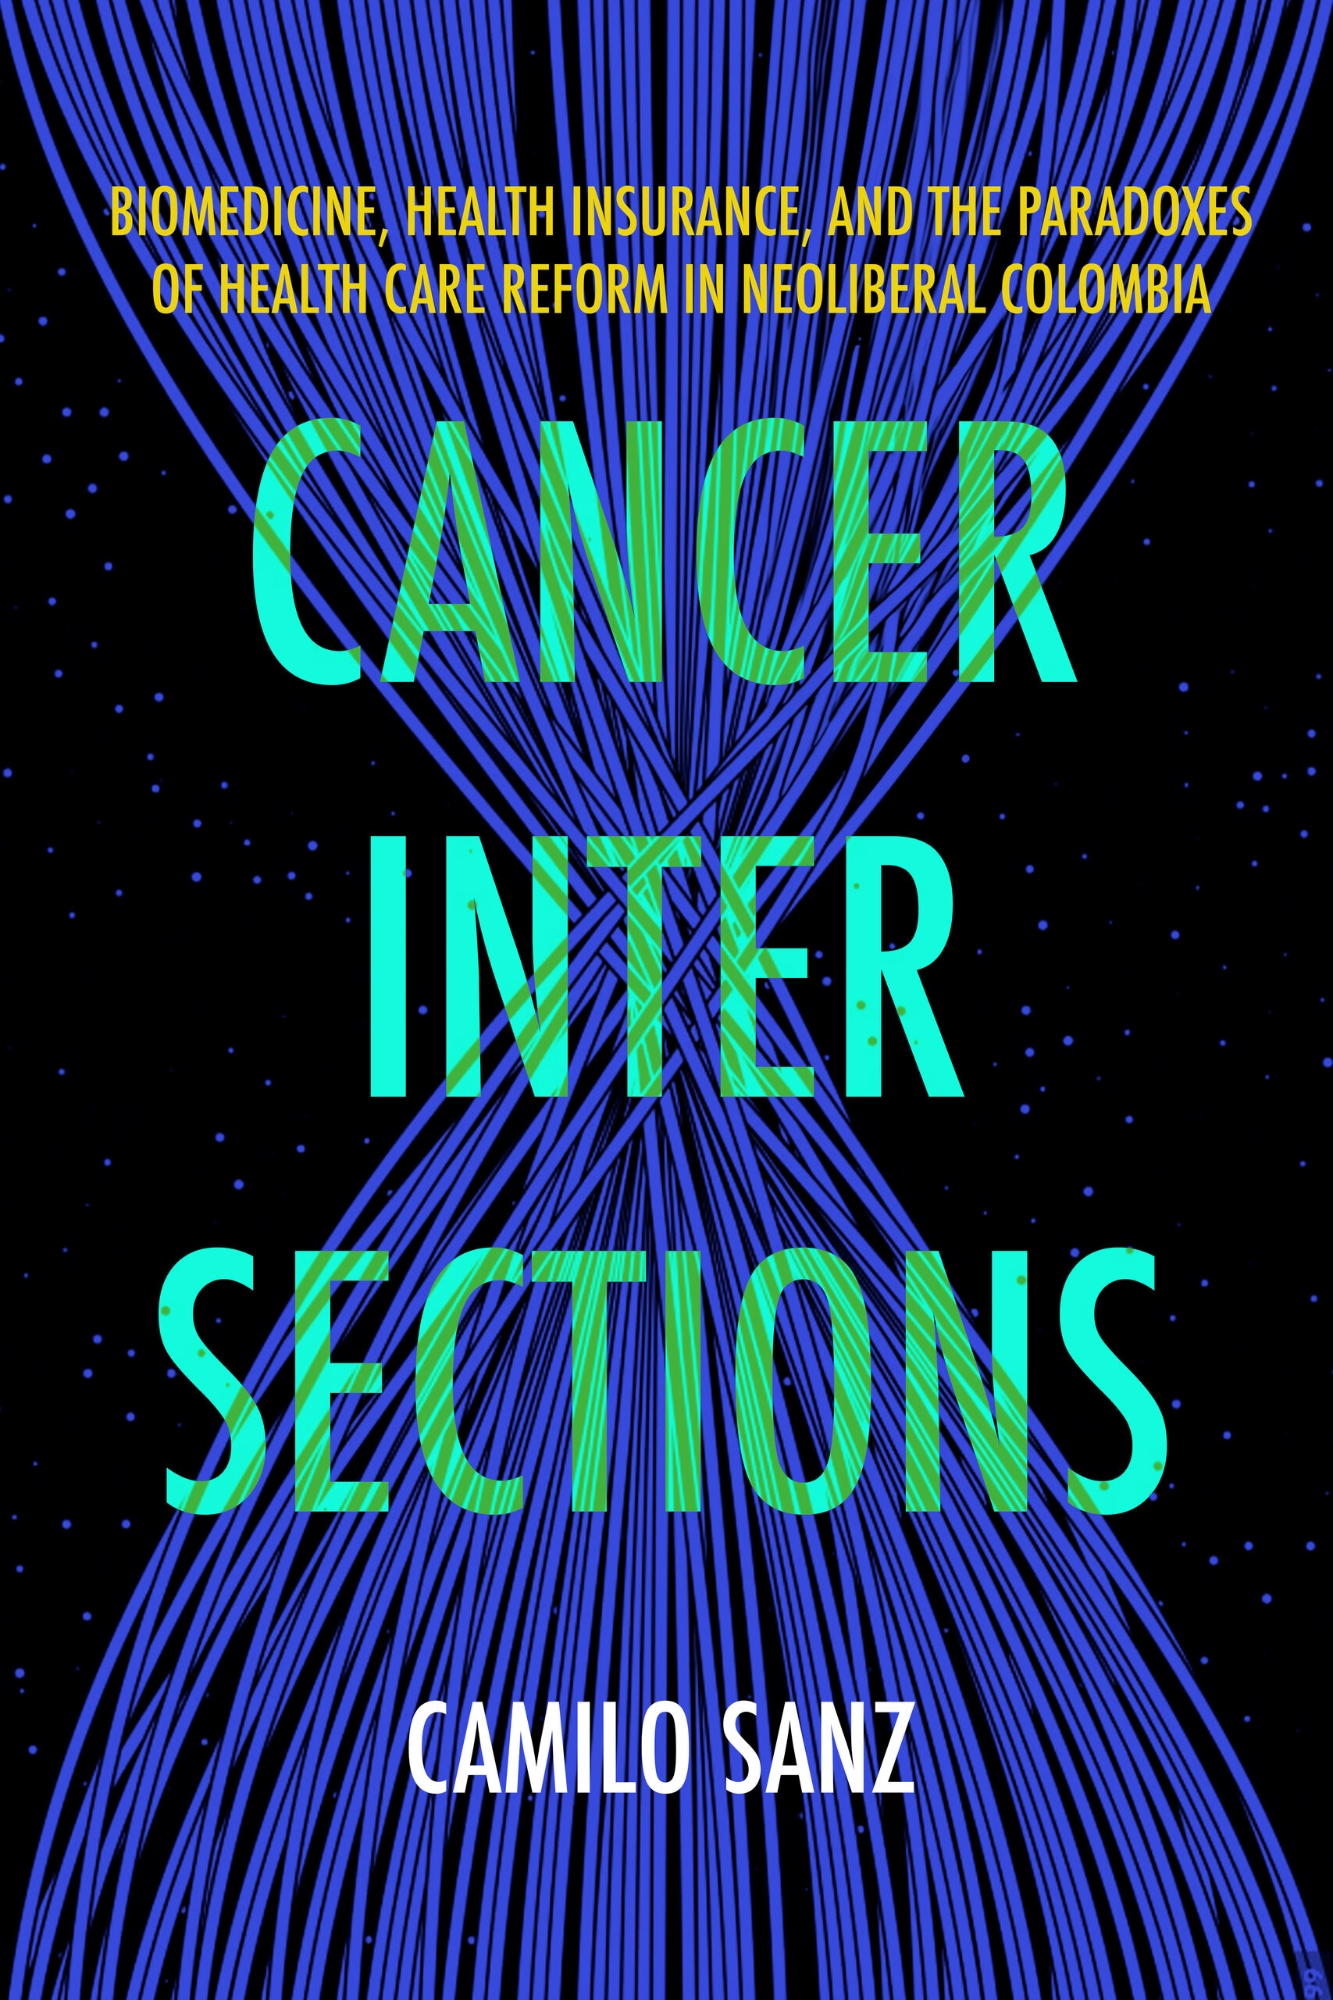 Cancer Intersections cover image, a book by Camilo Sanz.